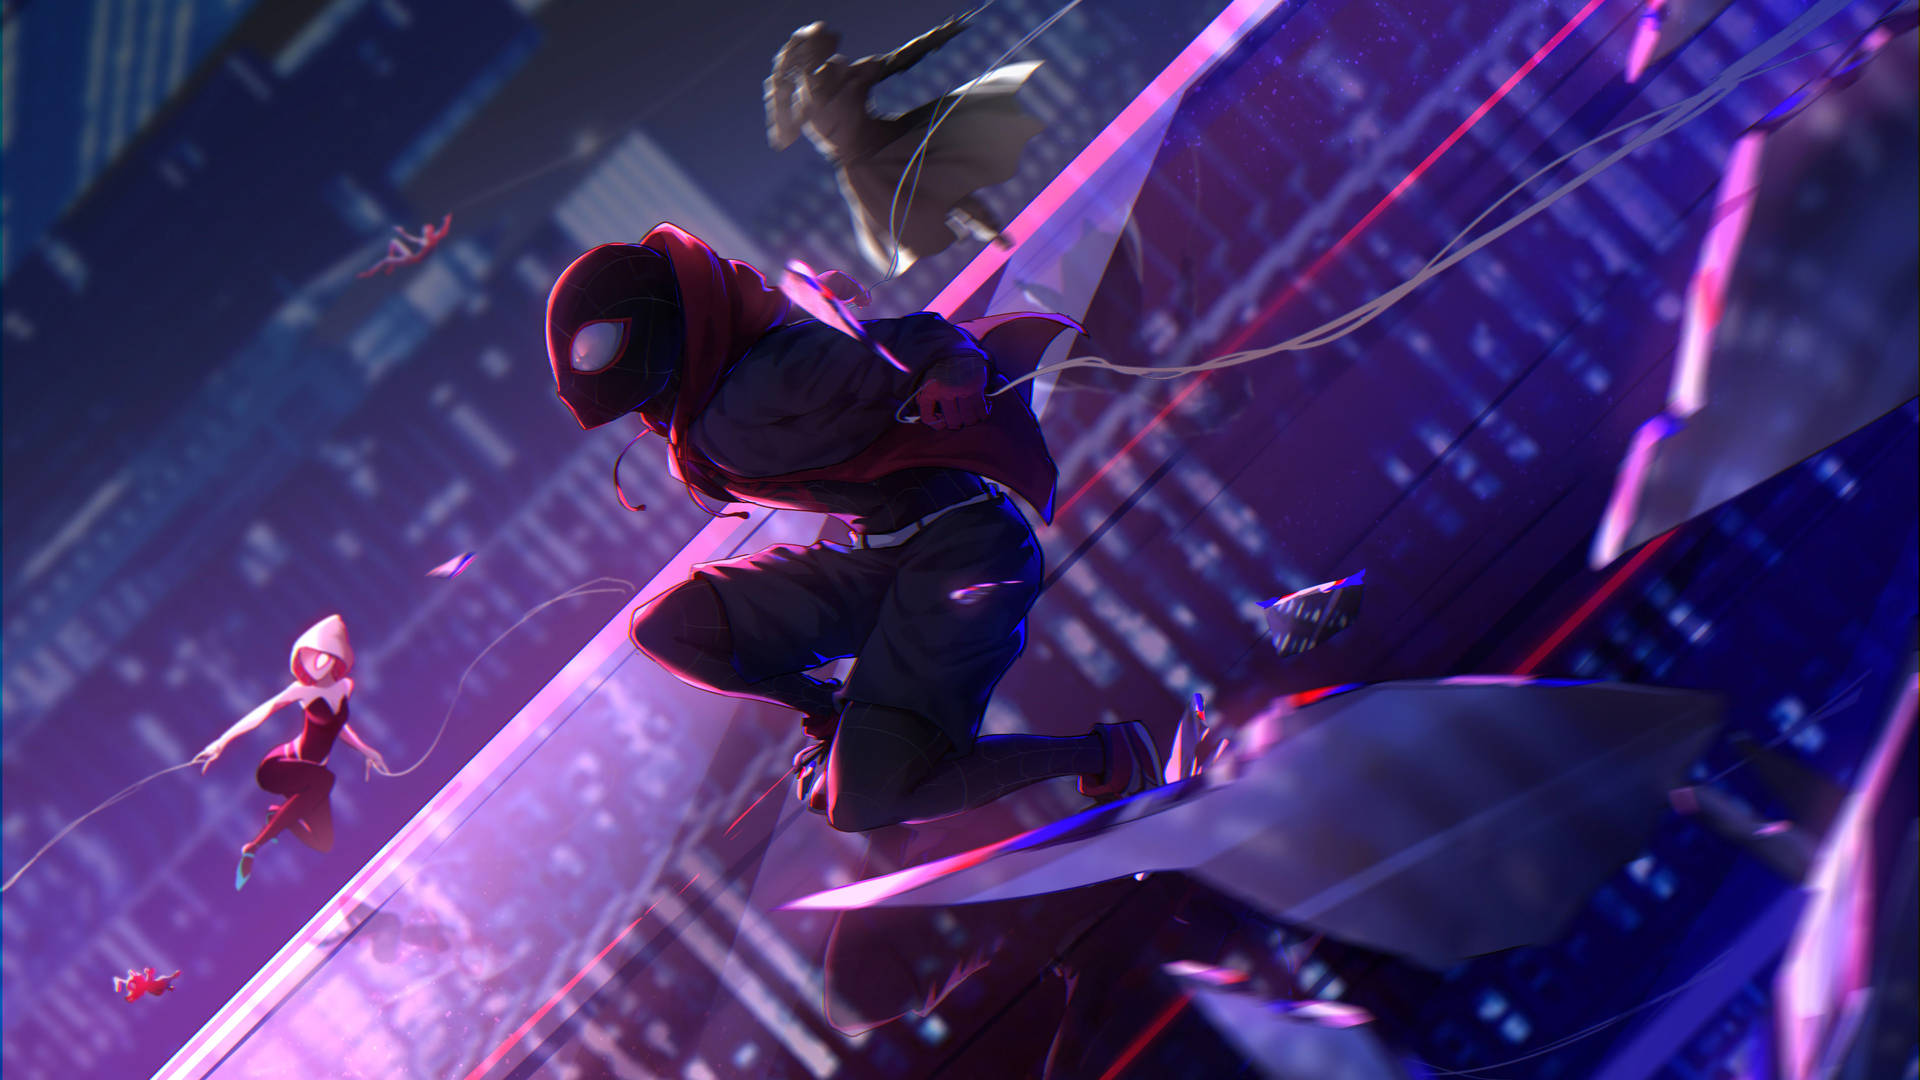 Vibrant Fanart Image of Spider-Man Into the Spider-Verse Wallpaper